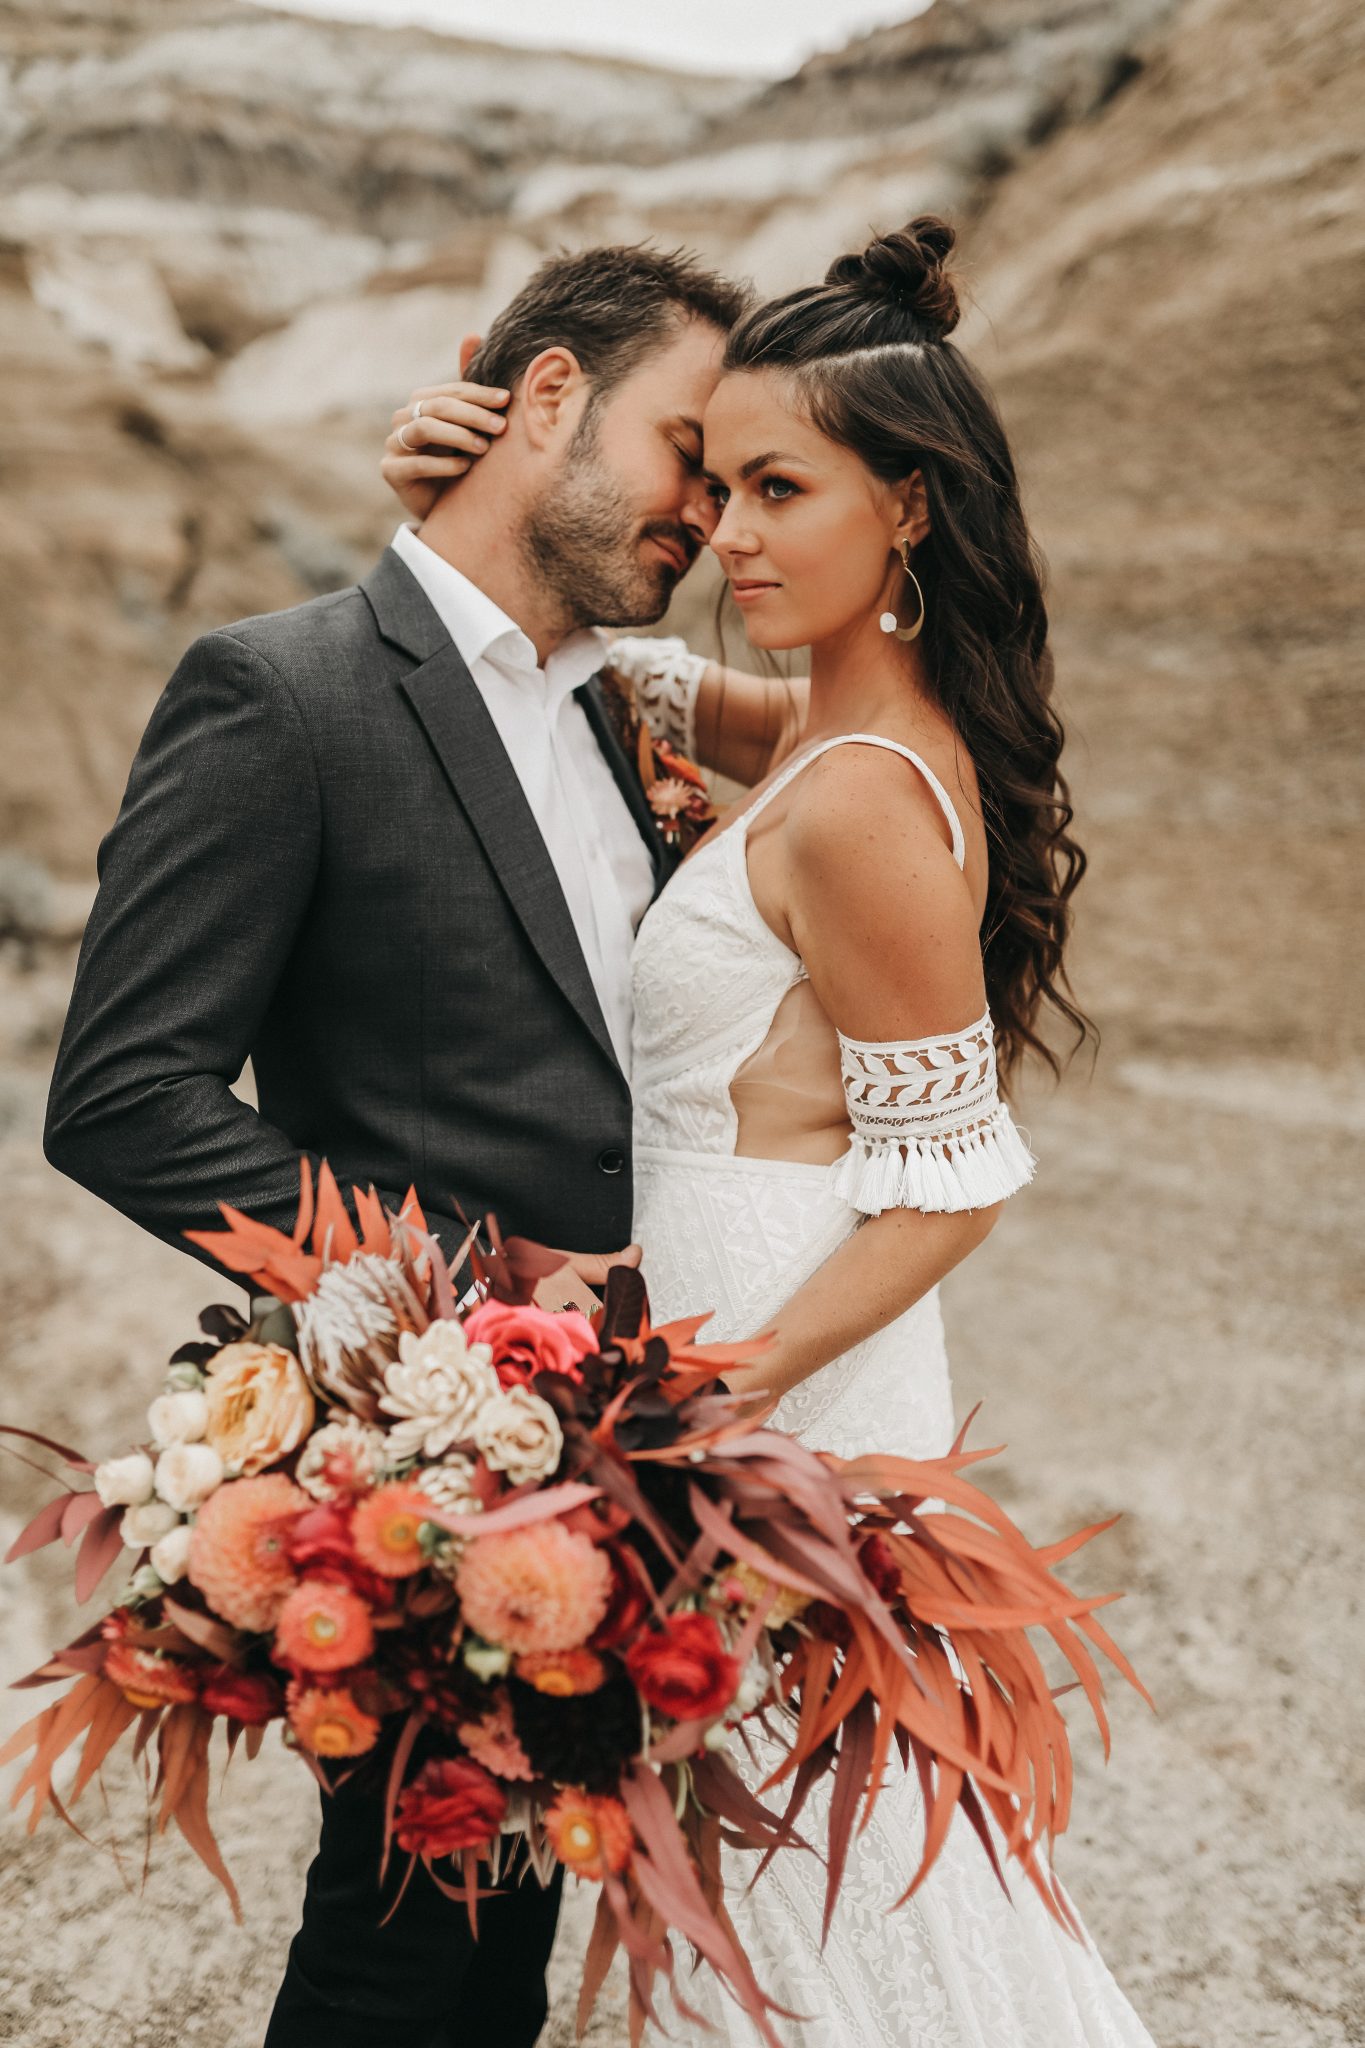 Wedding attire for Moroccan Elopement Inspiration with boho lace bridal cuffs and a terracotta palette